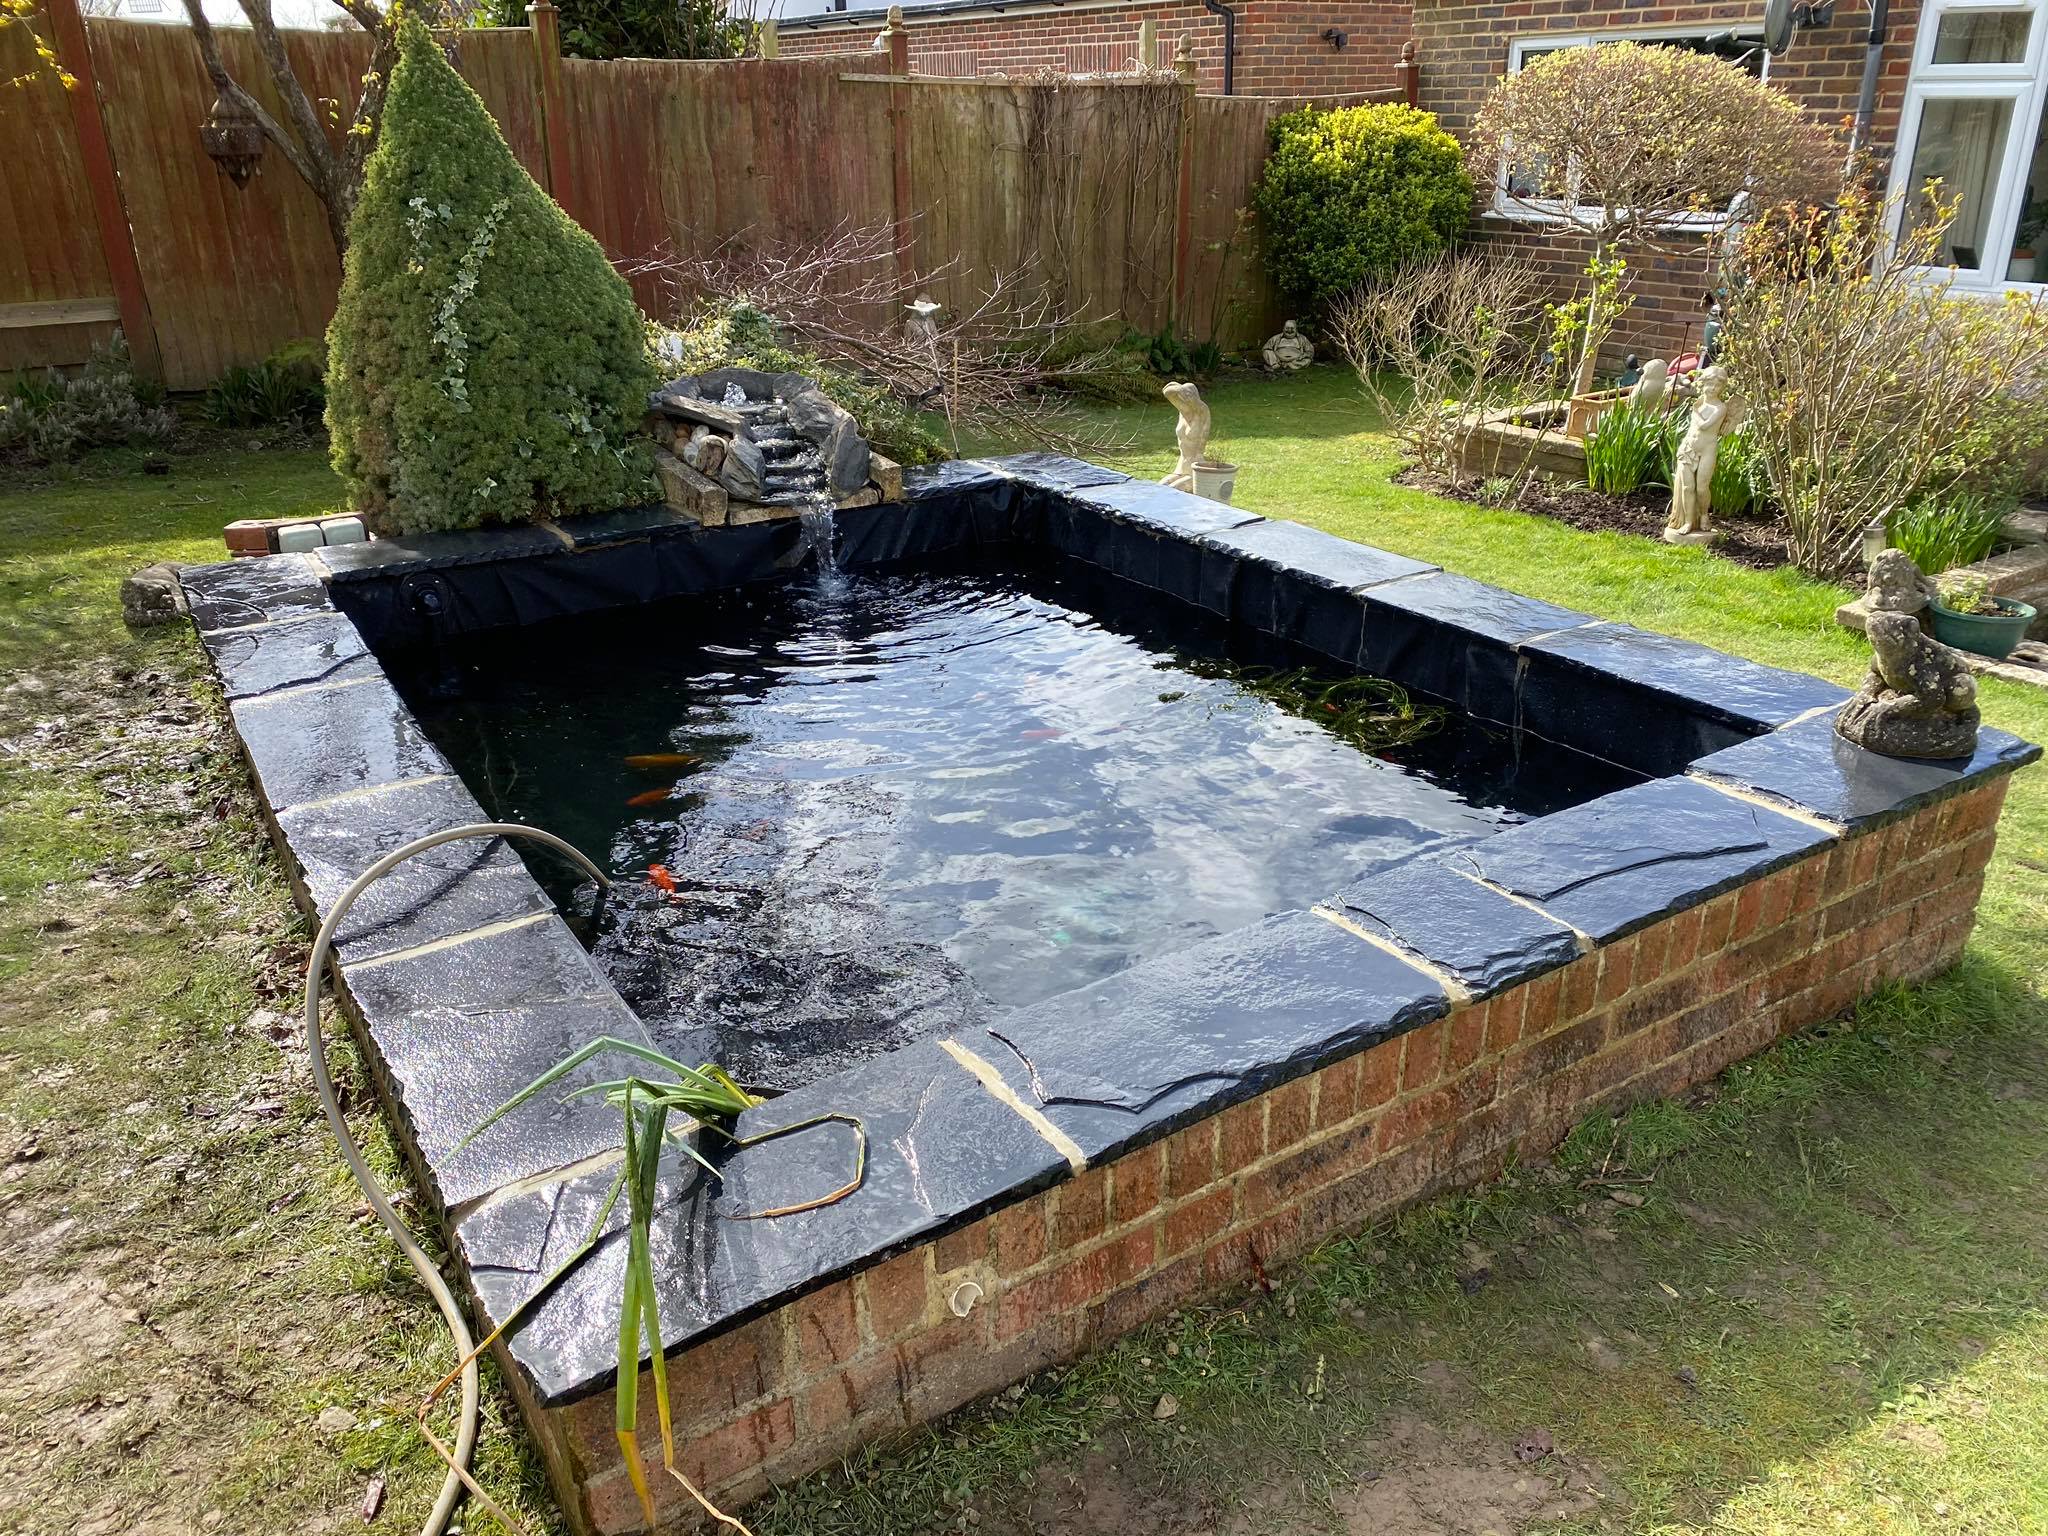 Full pond clean & tidy in Worthing